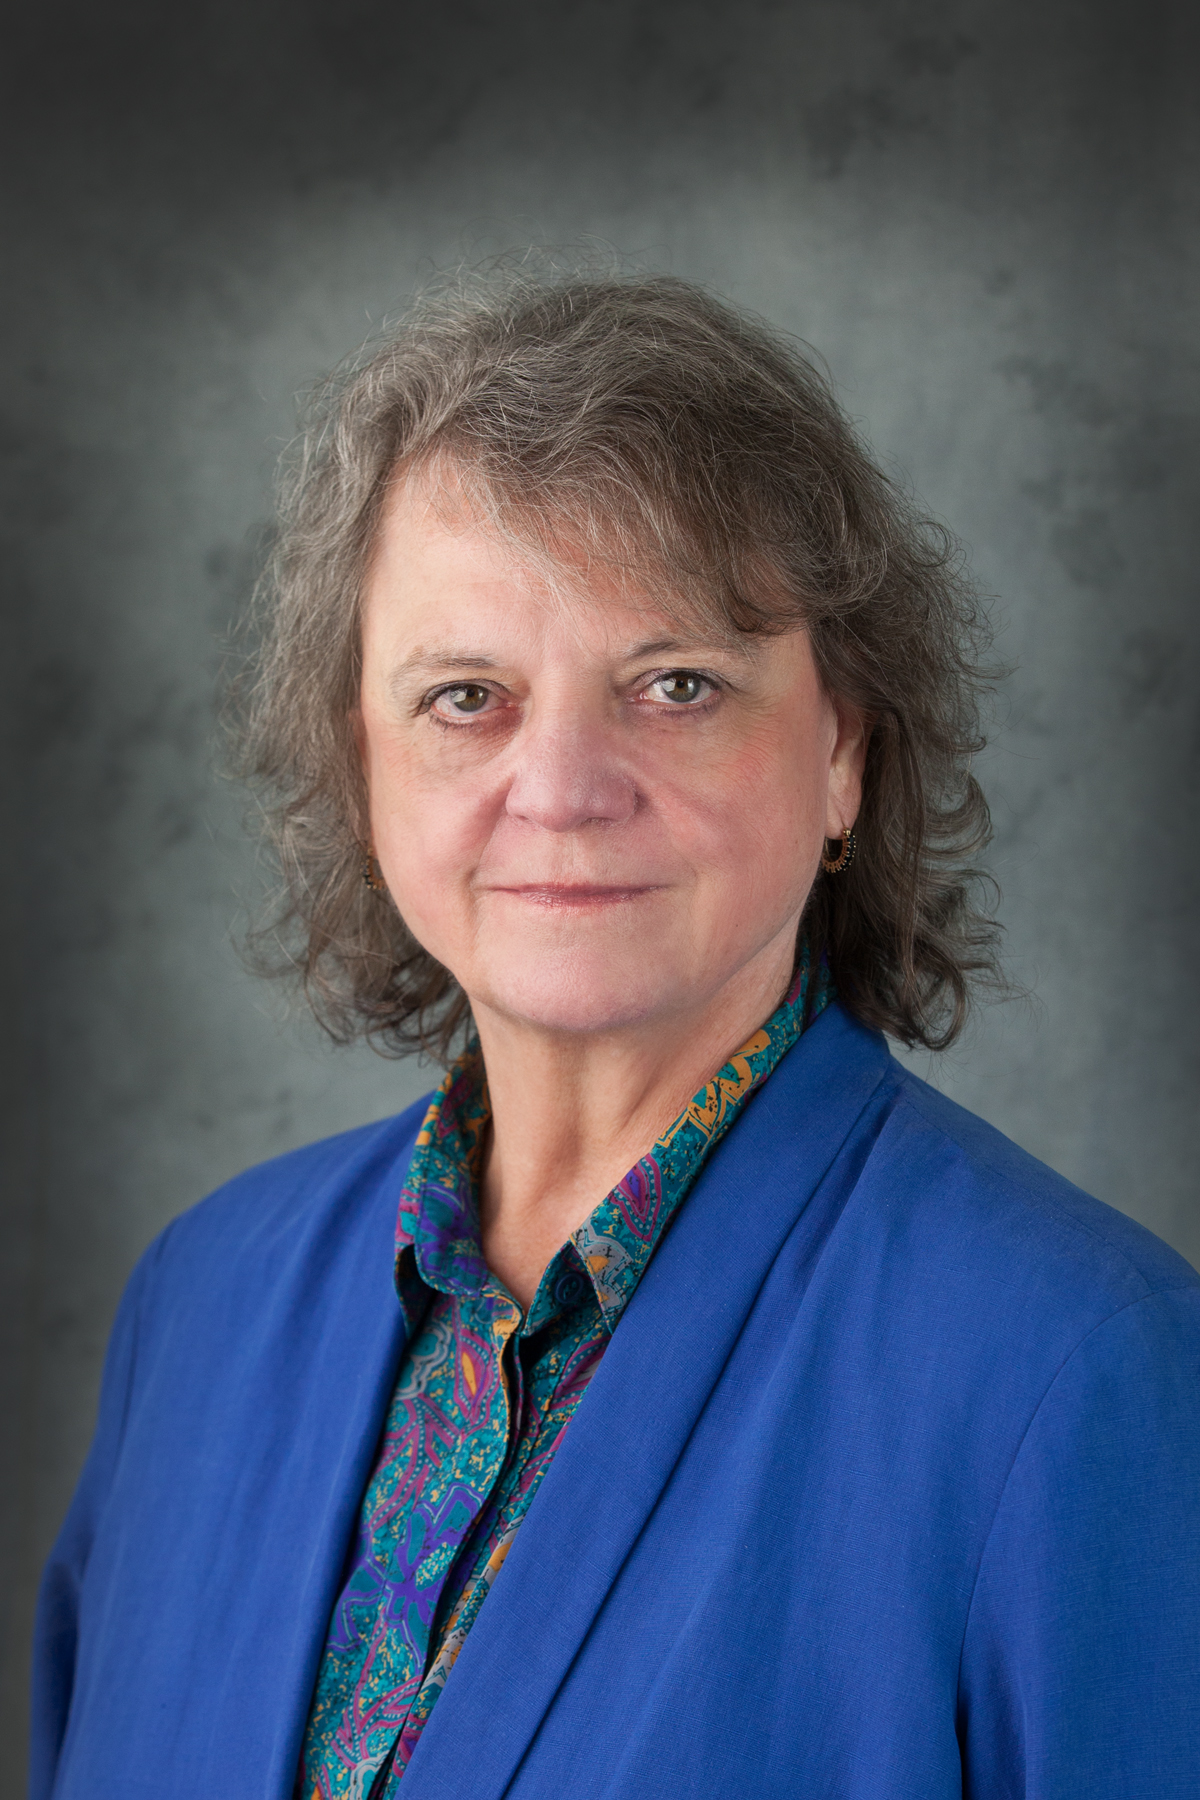 Kathleen Fletcher, Ph.D., was named to serve on the Advisory Board of the newly formed Institute for Innovations in Caregiving.